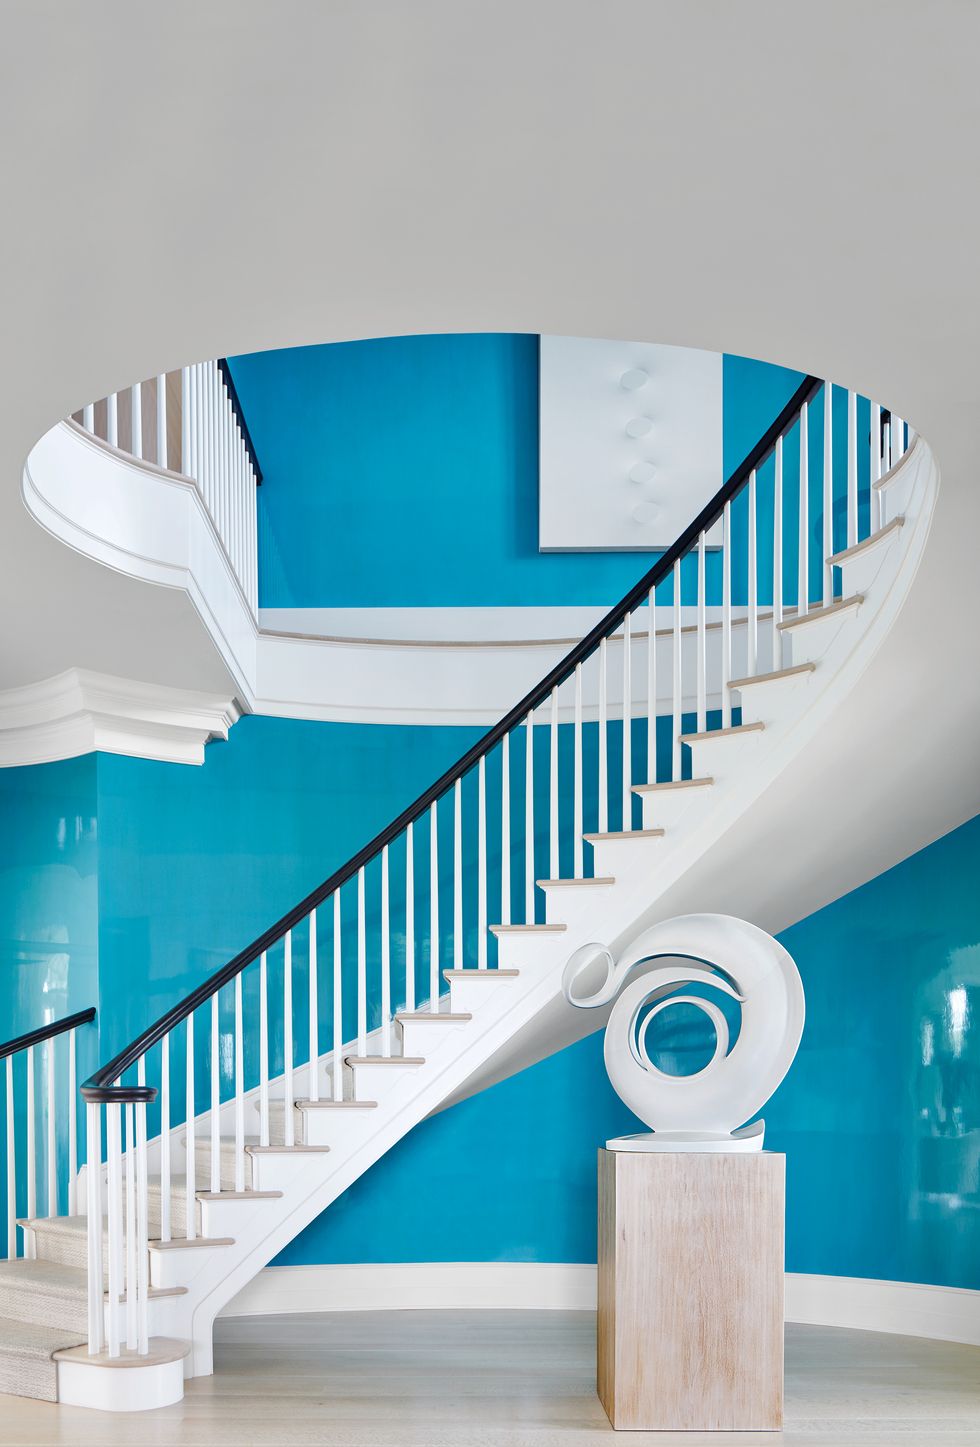 Spiral staircase with blue walls